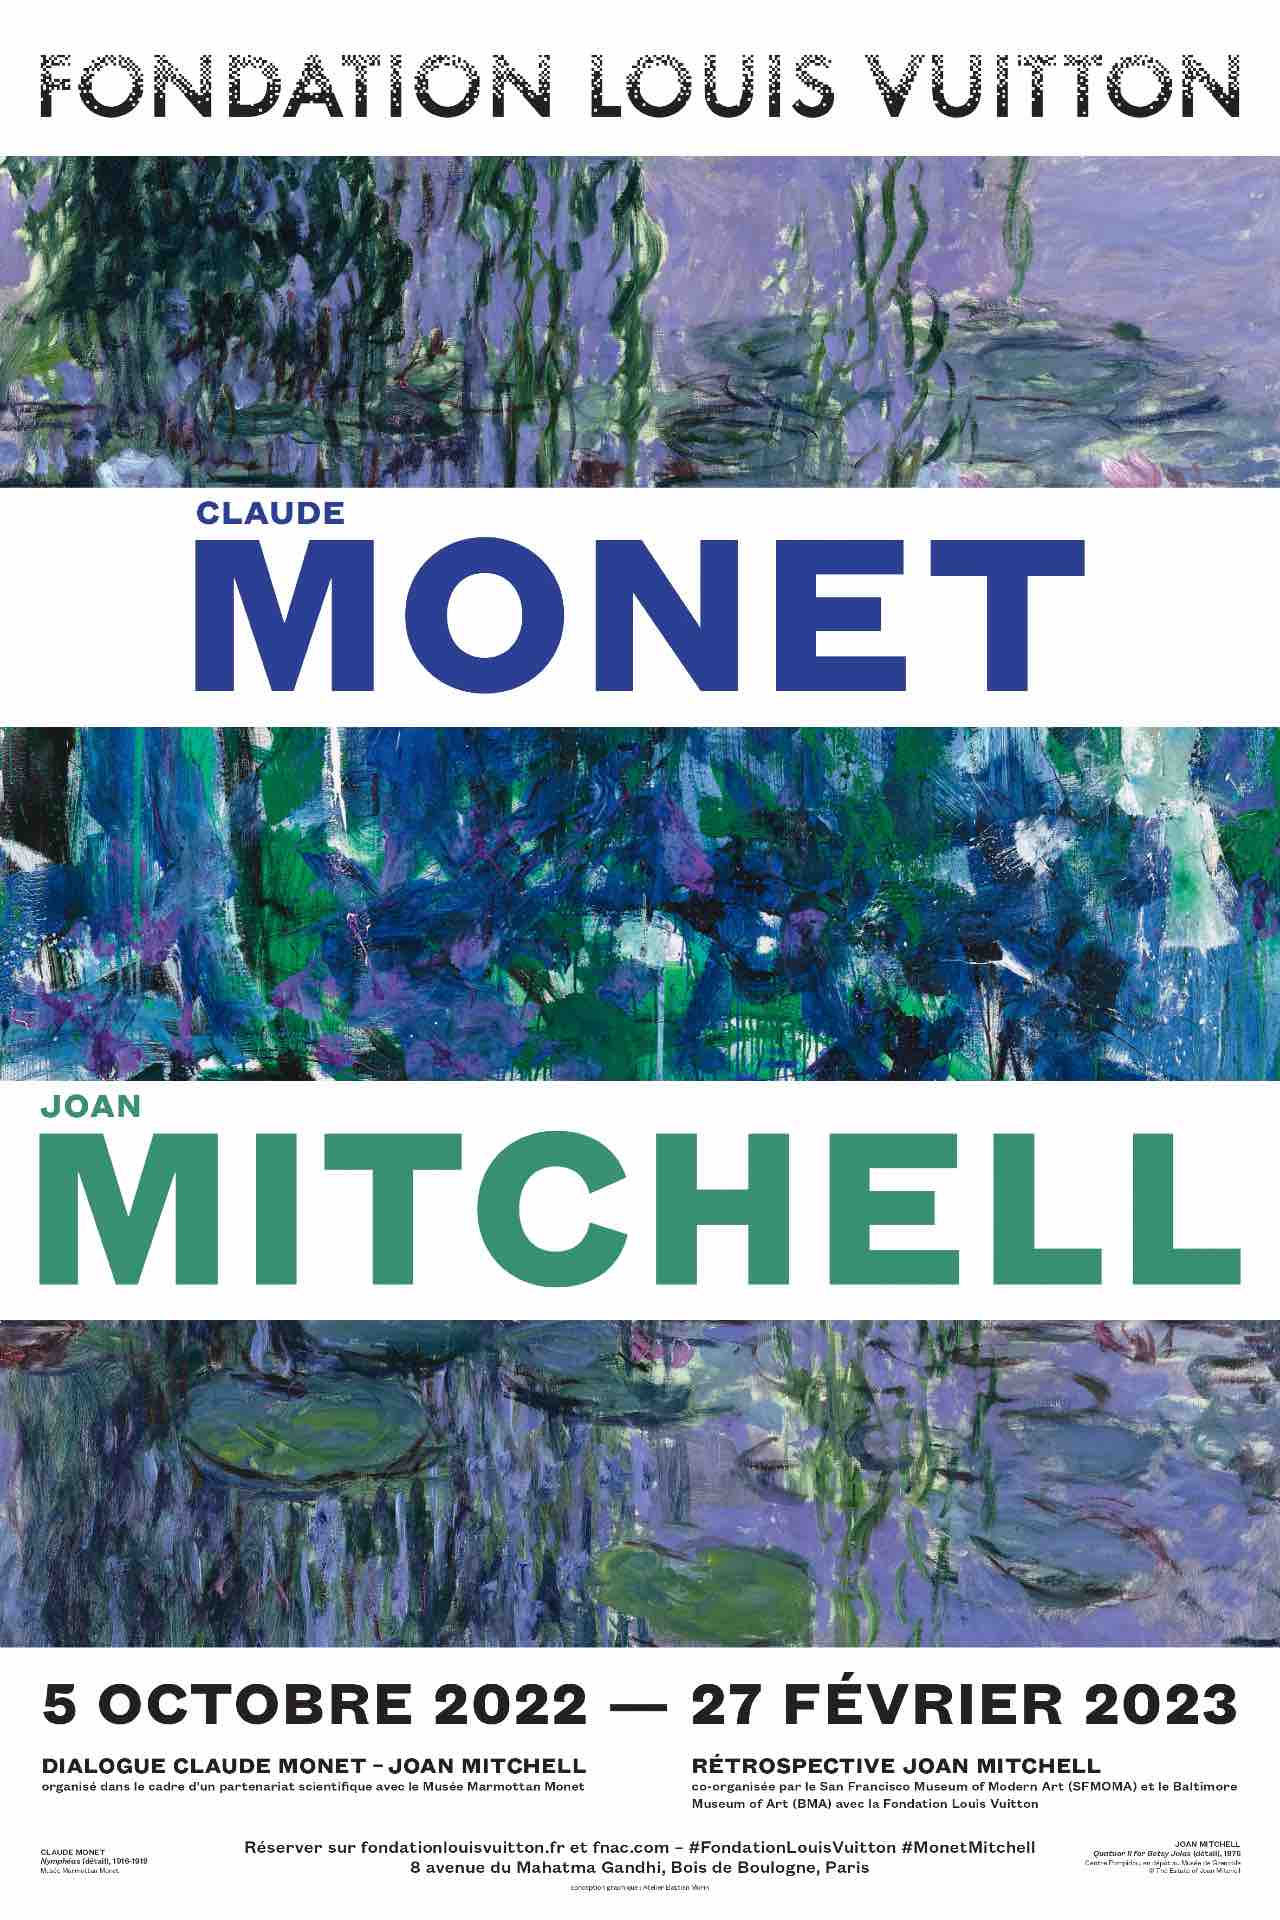 Monet-Mitchell, the fall event at the Fondation Louis Vuitton